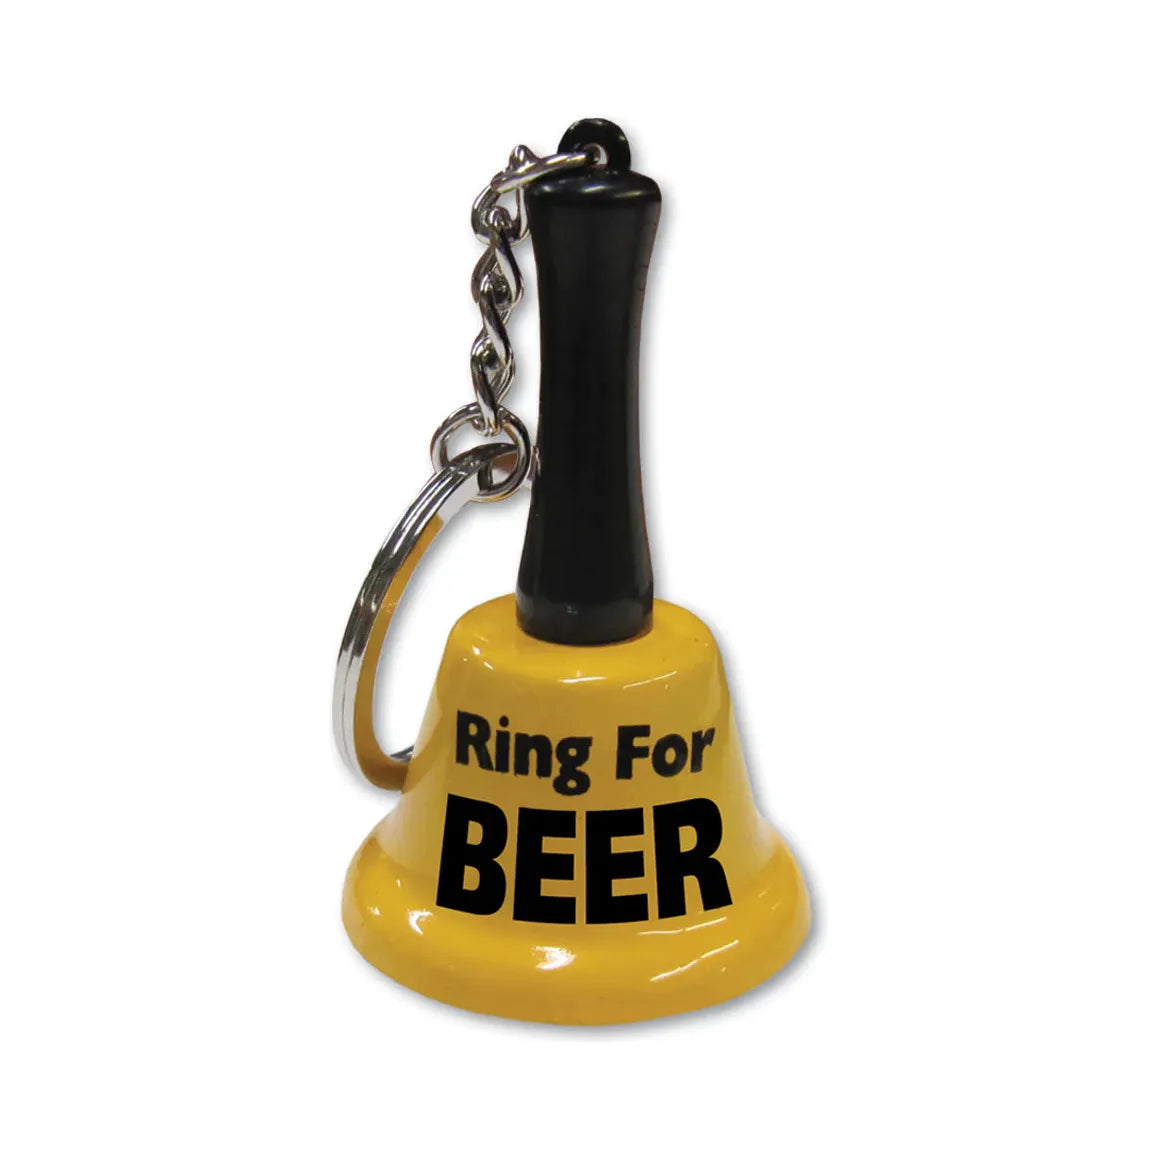 Ring for Beer Keychain by Ozze Creations